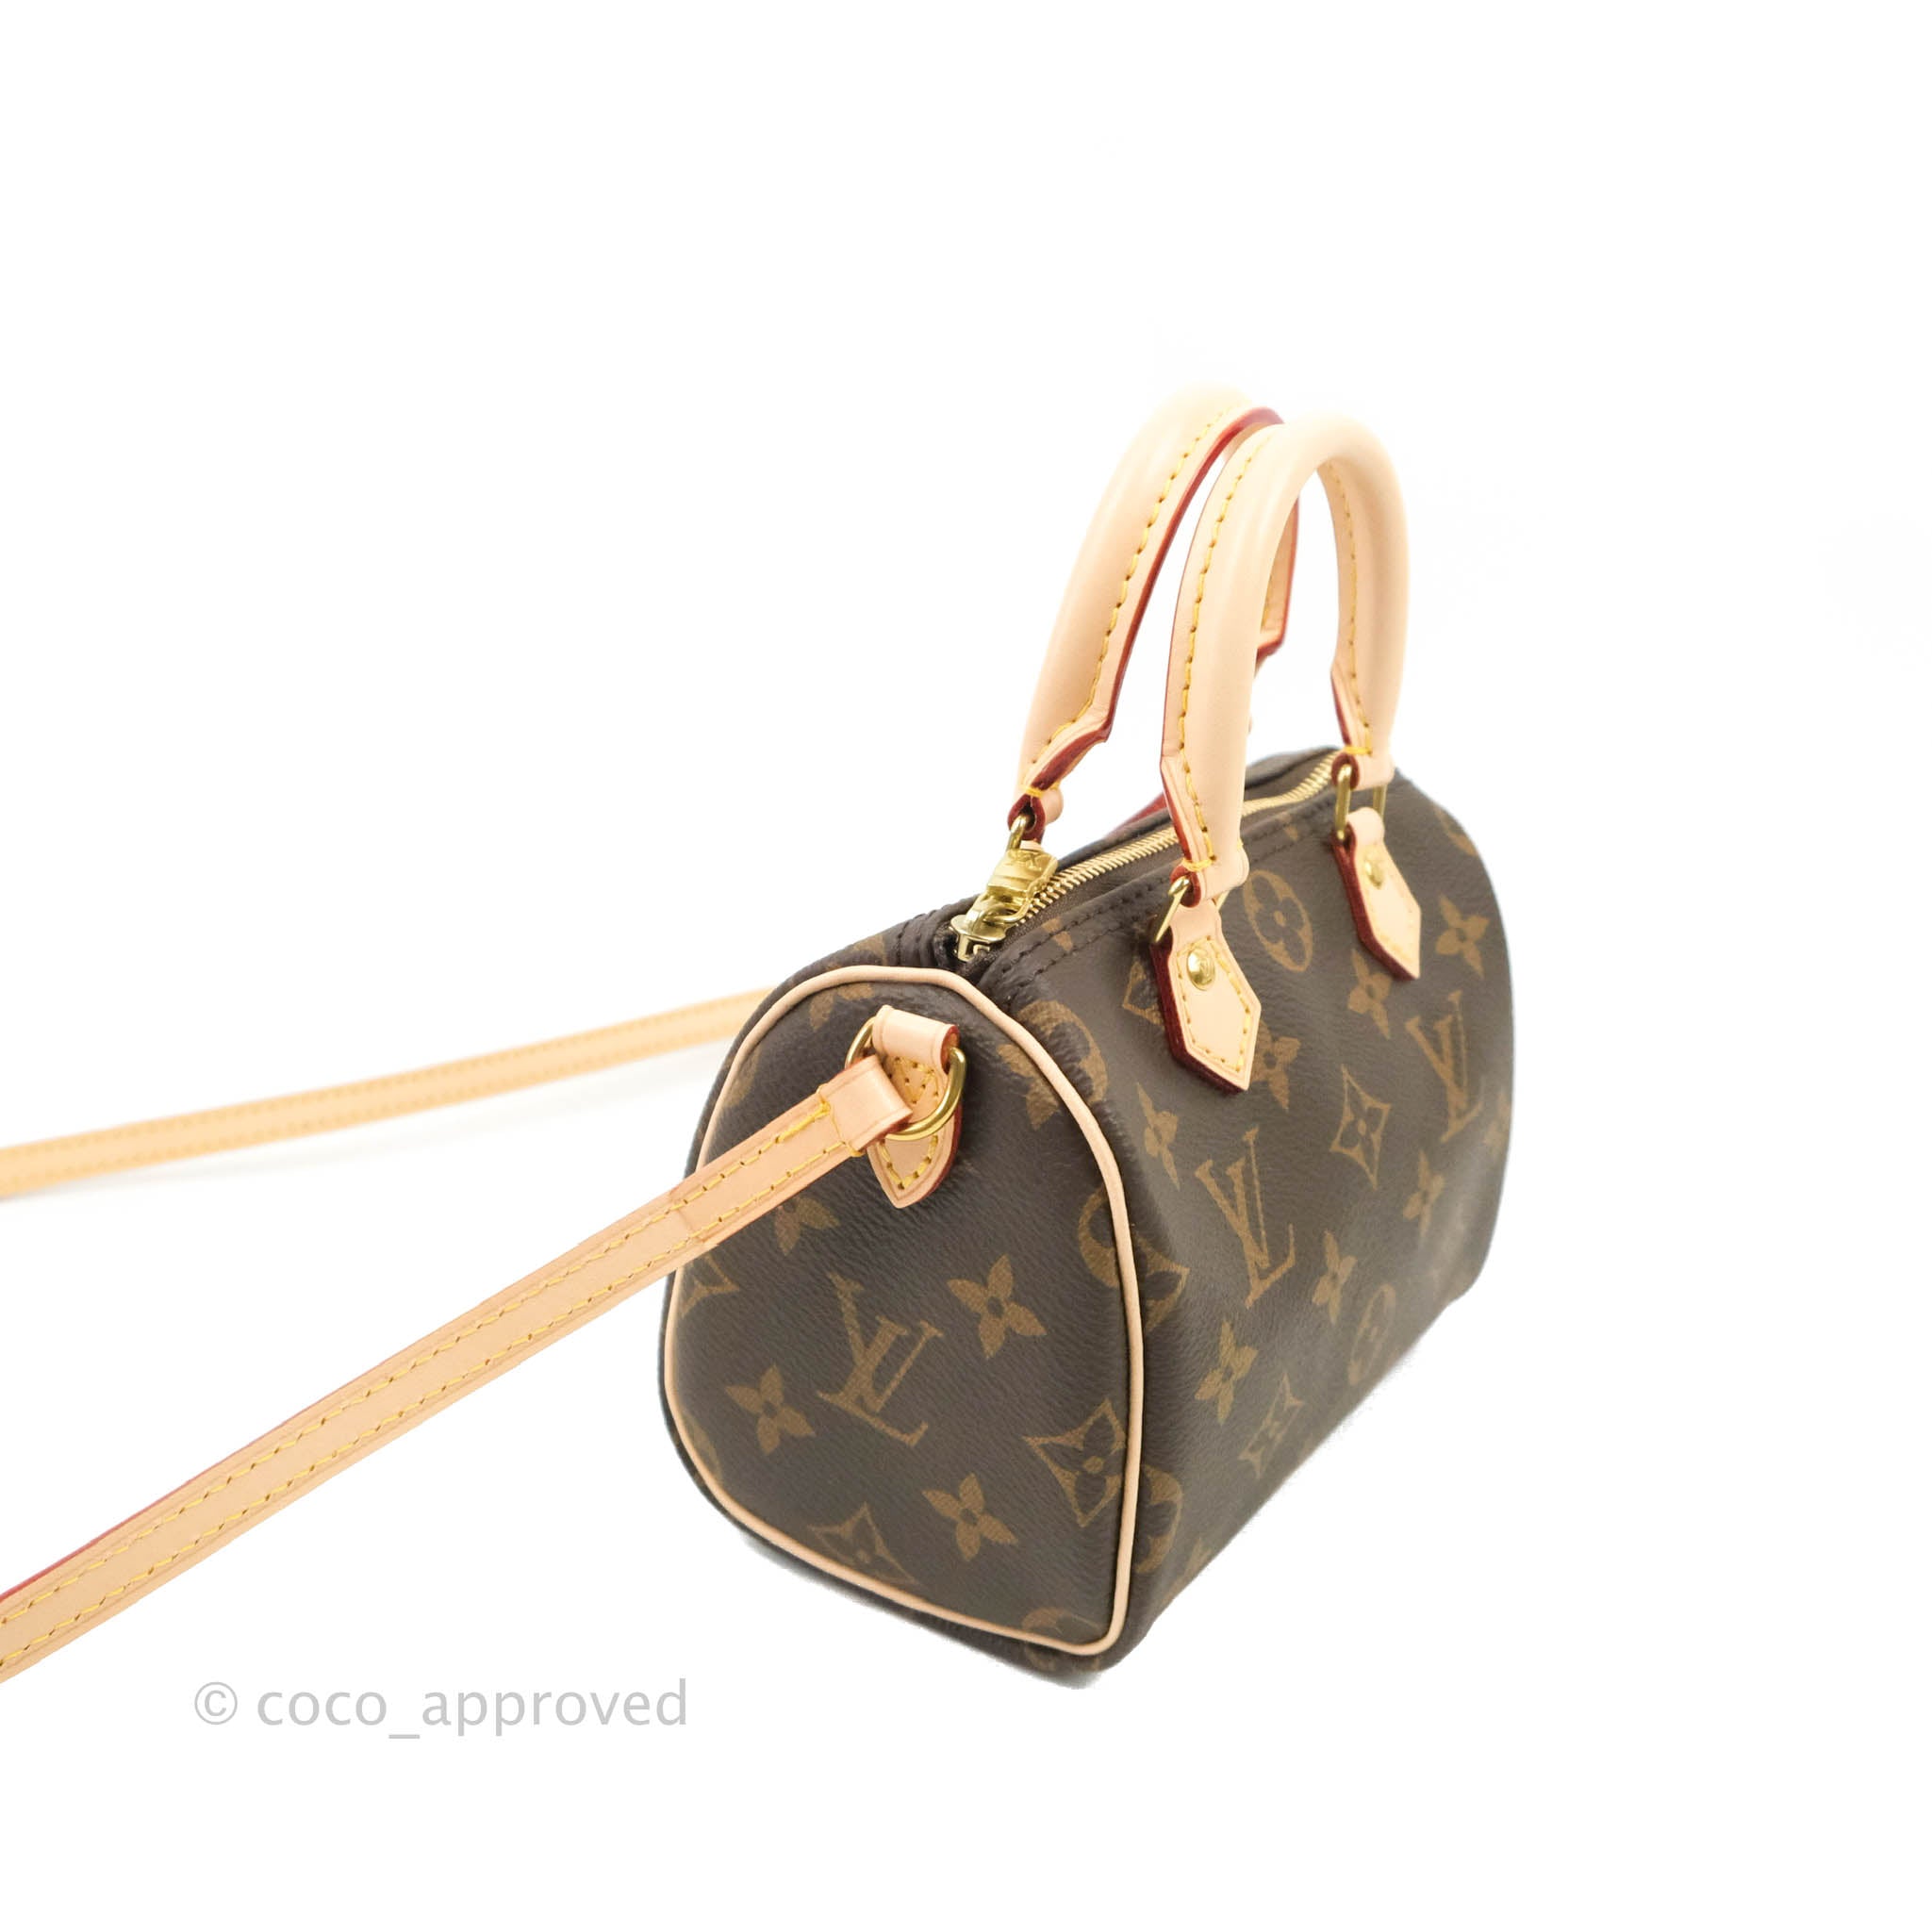 Pint-sized perfection 🤩 Hunt this Louis Vuitton Nano Speedy and